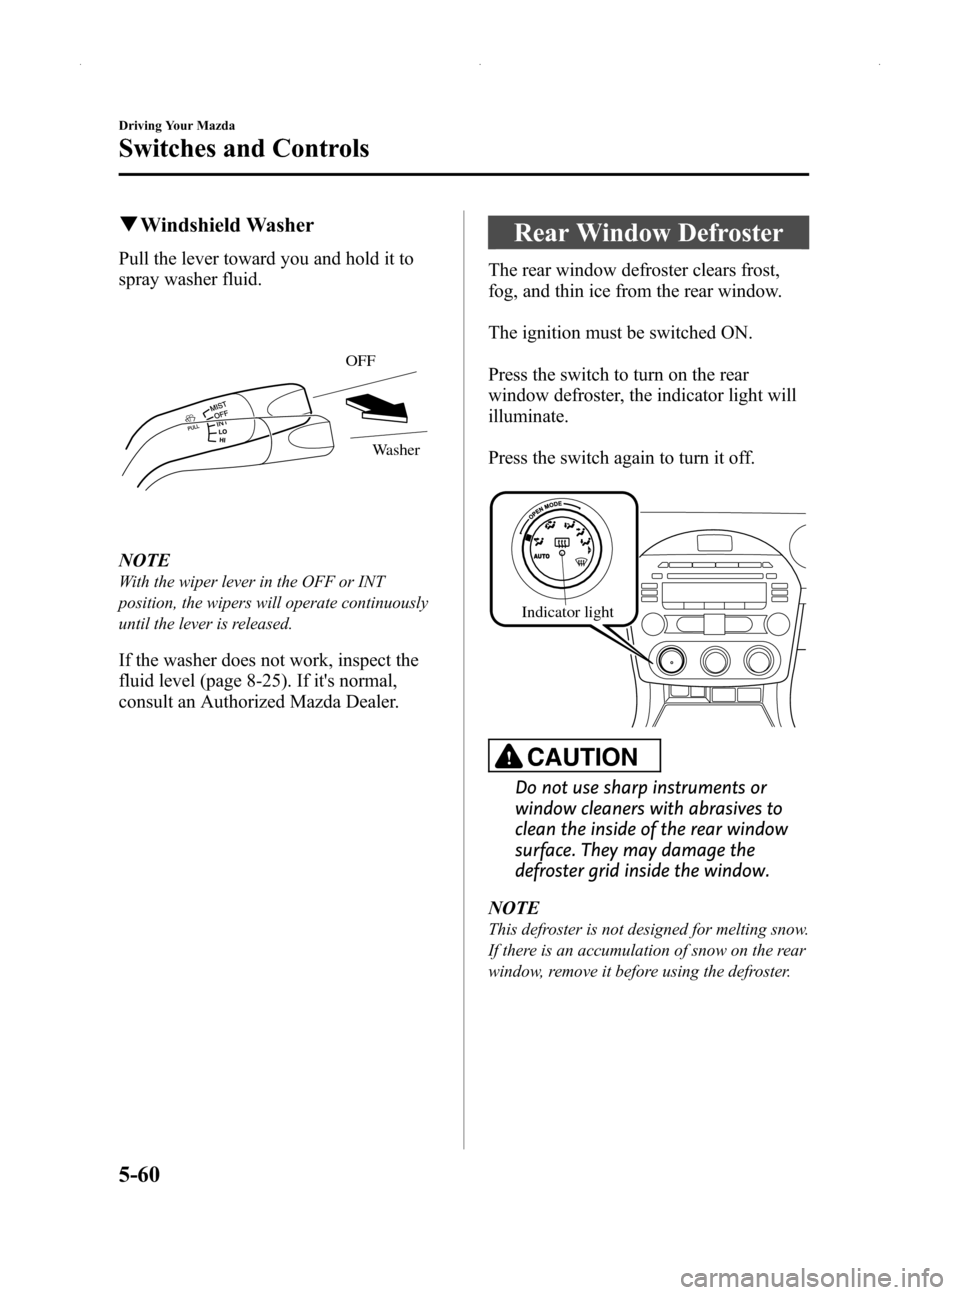 MAZDA MODEL MX-5 2014  Owners Manual (in English) Black plate (204,1)
qWindshield Washer
Pull the lever toward you and hold it to
spray washer fluid.
OFF
Washer
NOTE
With the wiper lever in the OFF or INT
position, the wipers will operate continuousl